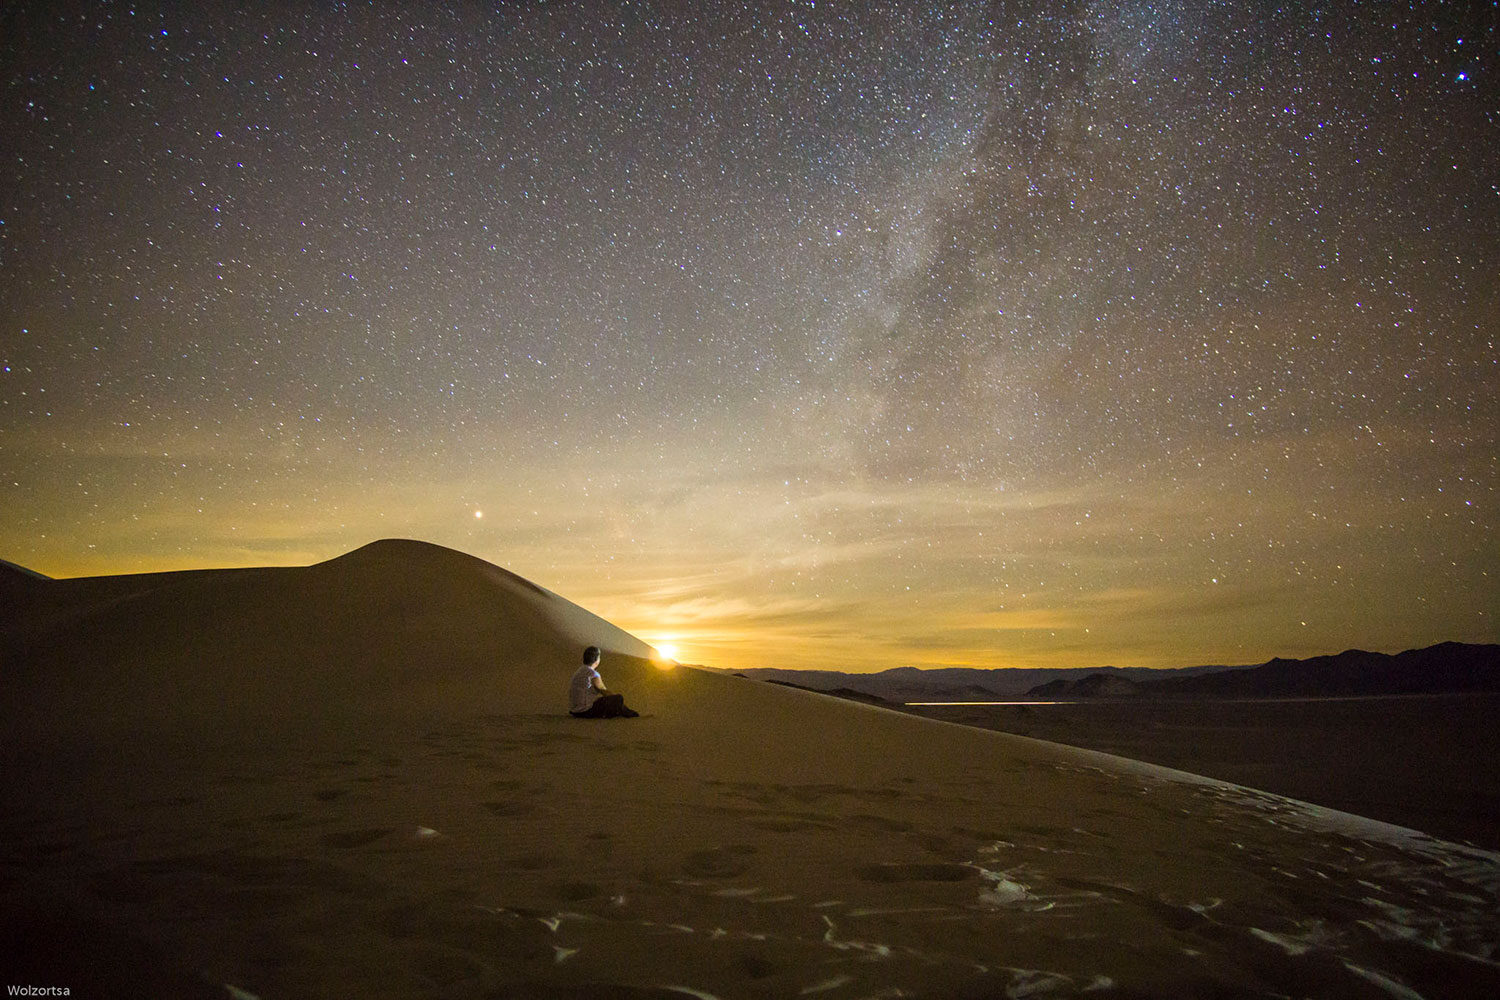 A person sitting cross-legged atop a sand dune contemplating the milky way.